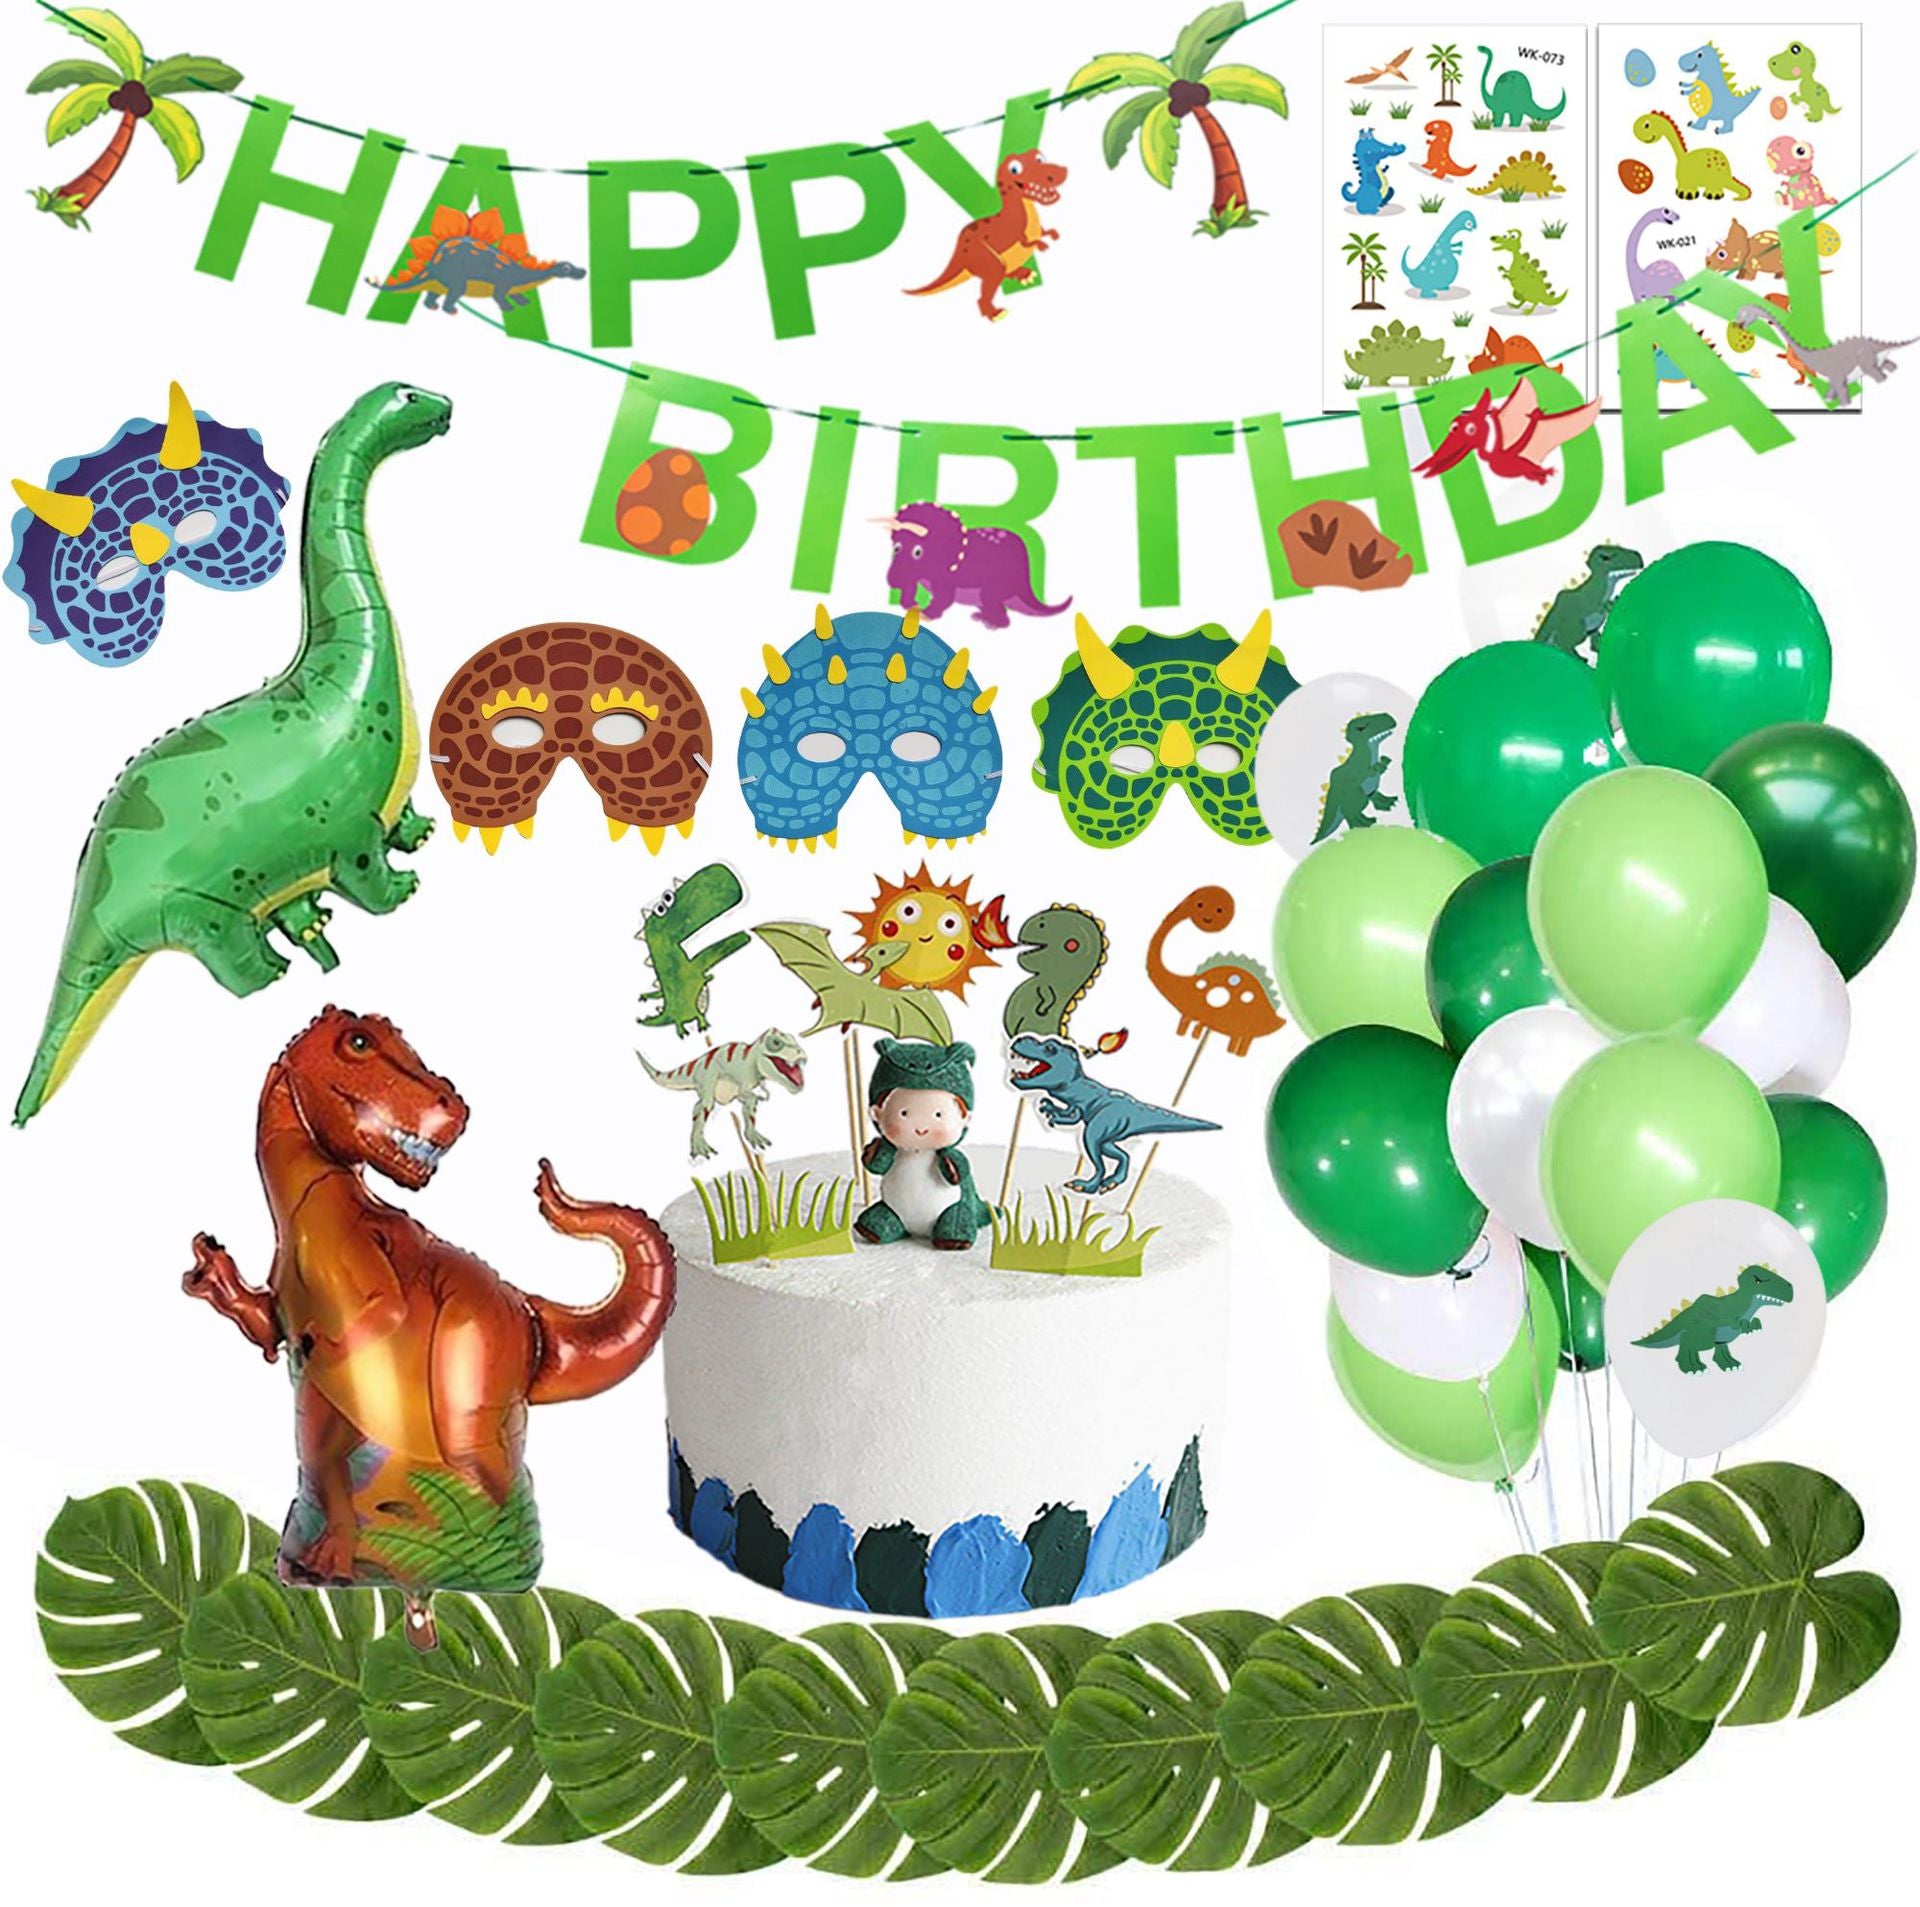 Balloon Wreath Kit Arch Wedding Party Decoration Balloon Arch Set, Shamrock garland, Leprechaun hat, Pot of gold, Irish flag bunting, Green clover decorations, Lucky charms decor, St. Patrick's Day banners, Celtic-themed ornaments, Rainbow-inspired decor, Green-themed party supplies, Irish Festival Decoration Items,  St Patricks Day Decoration Items, Decognomes,